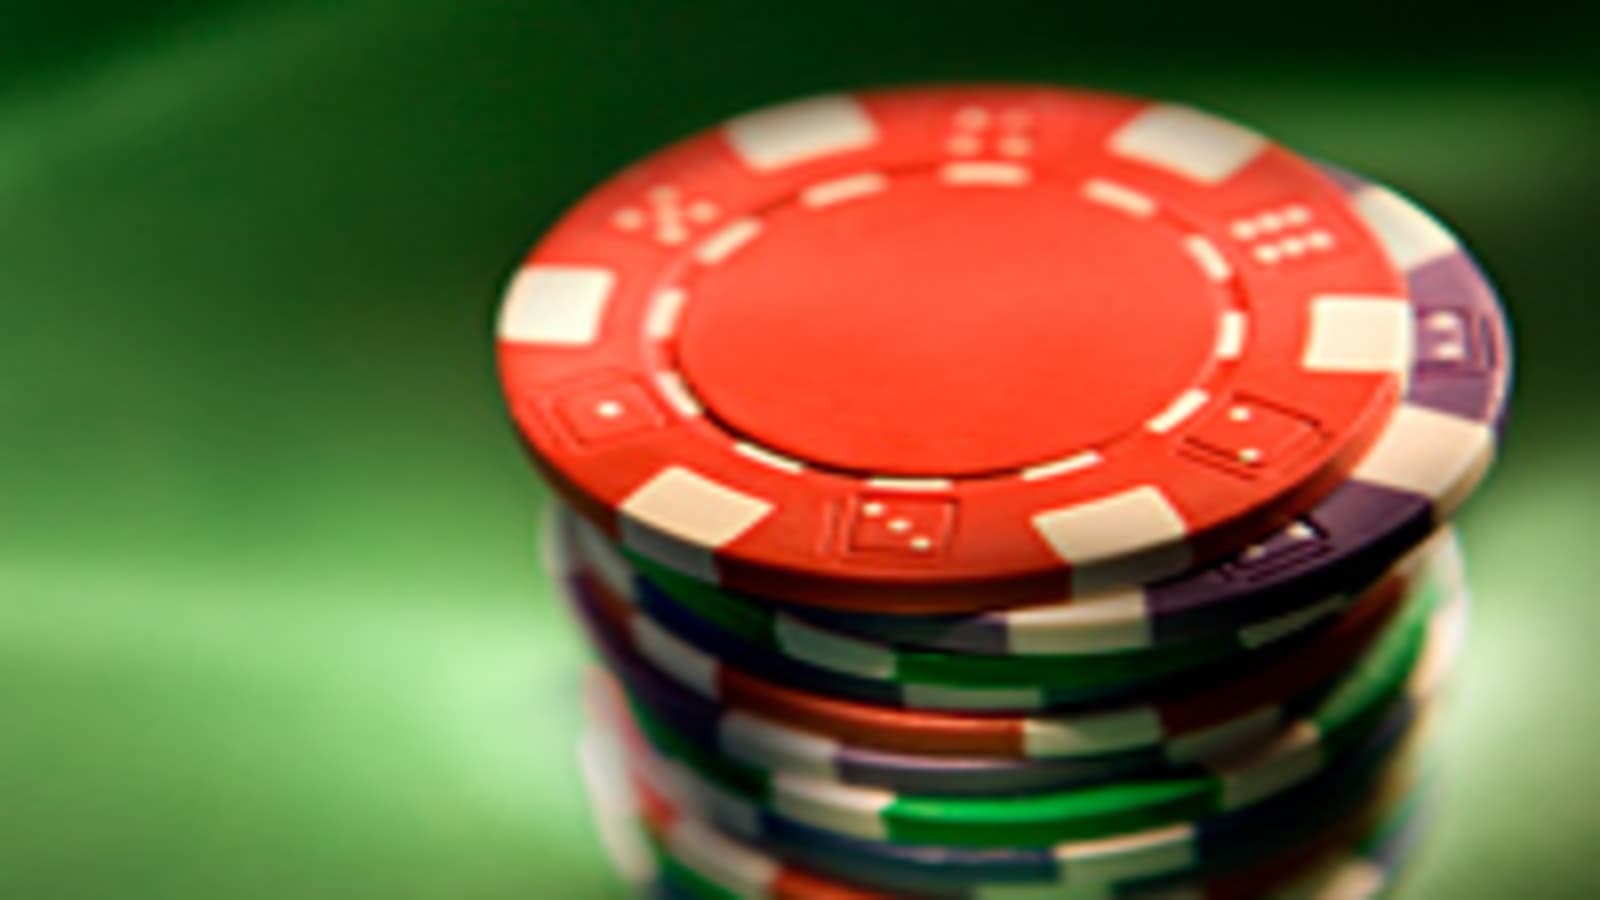 Why is the lottery more popular than other casino games?